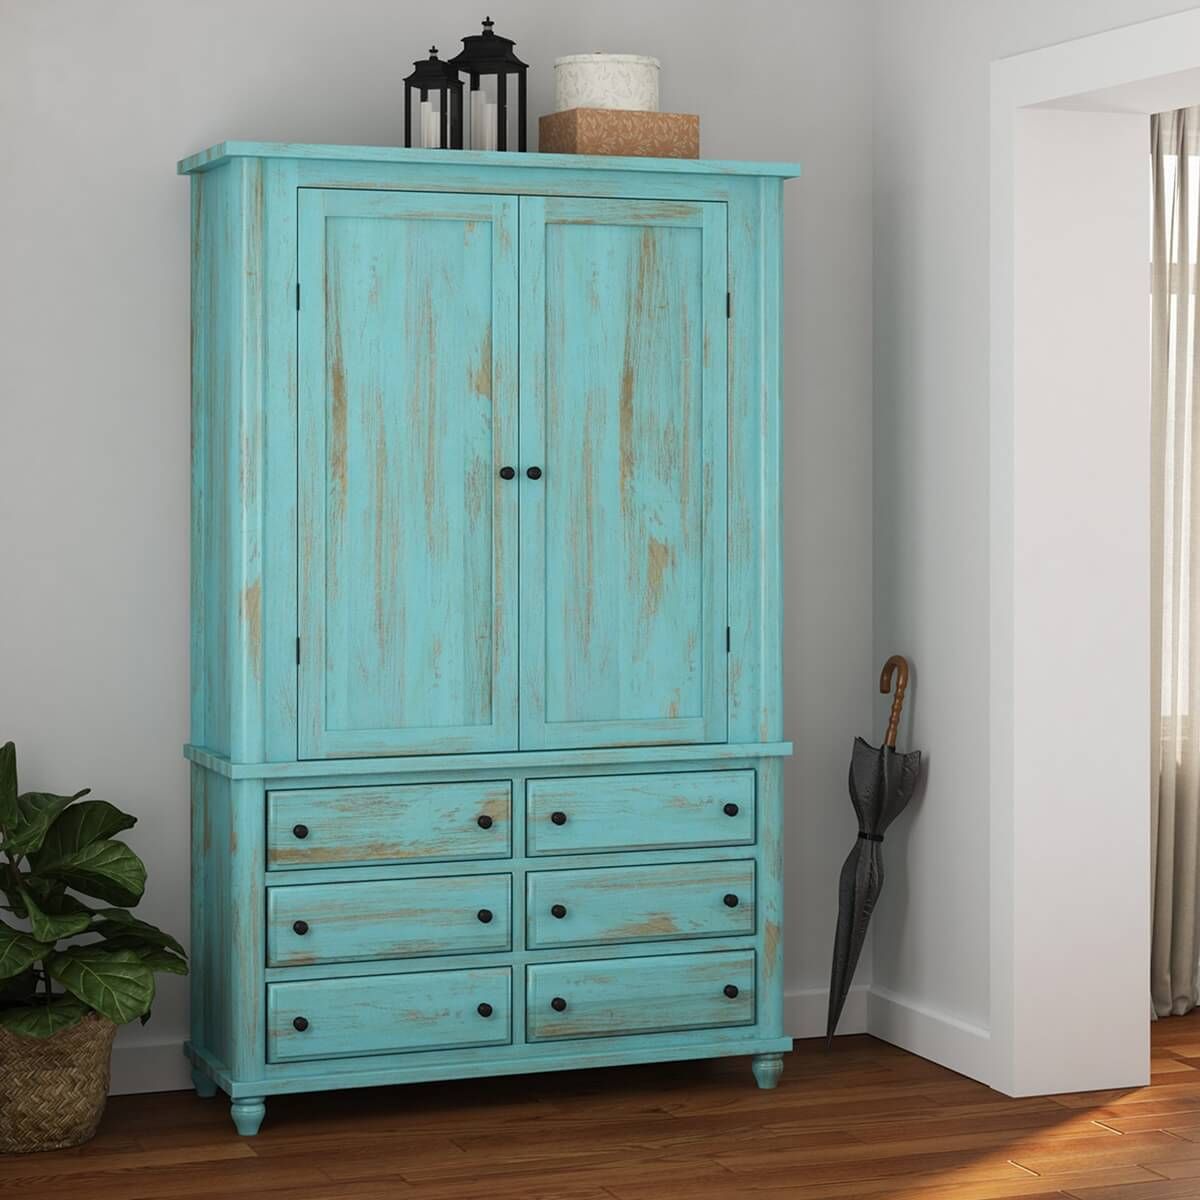 Victorian Turquoise Mango Wood Clothing Armoire Wardrobe With Drawers Throughout Victorian Wardrobes (View 7 of 15)